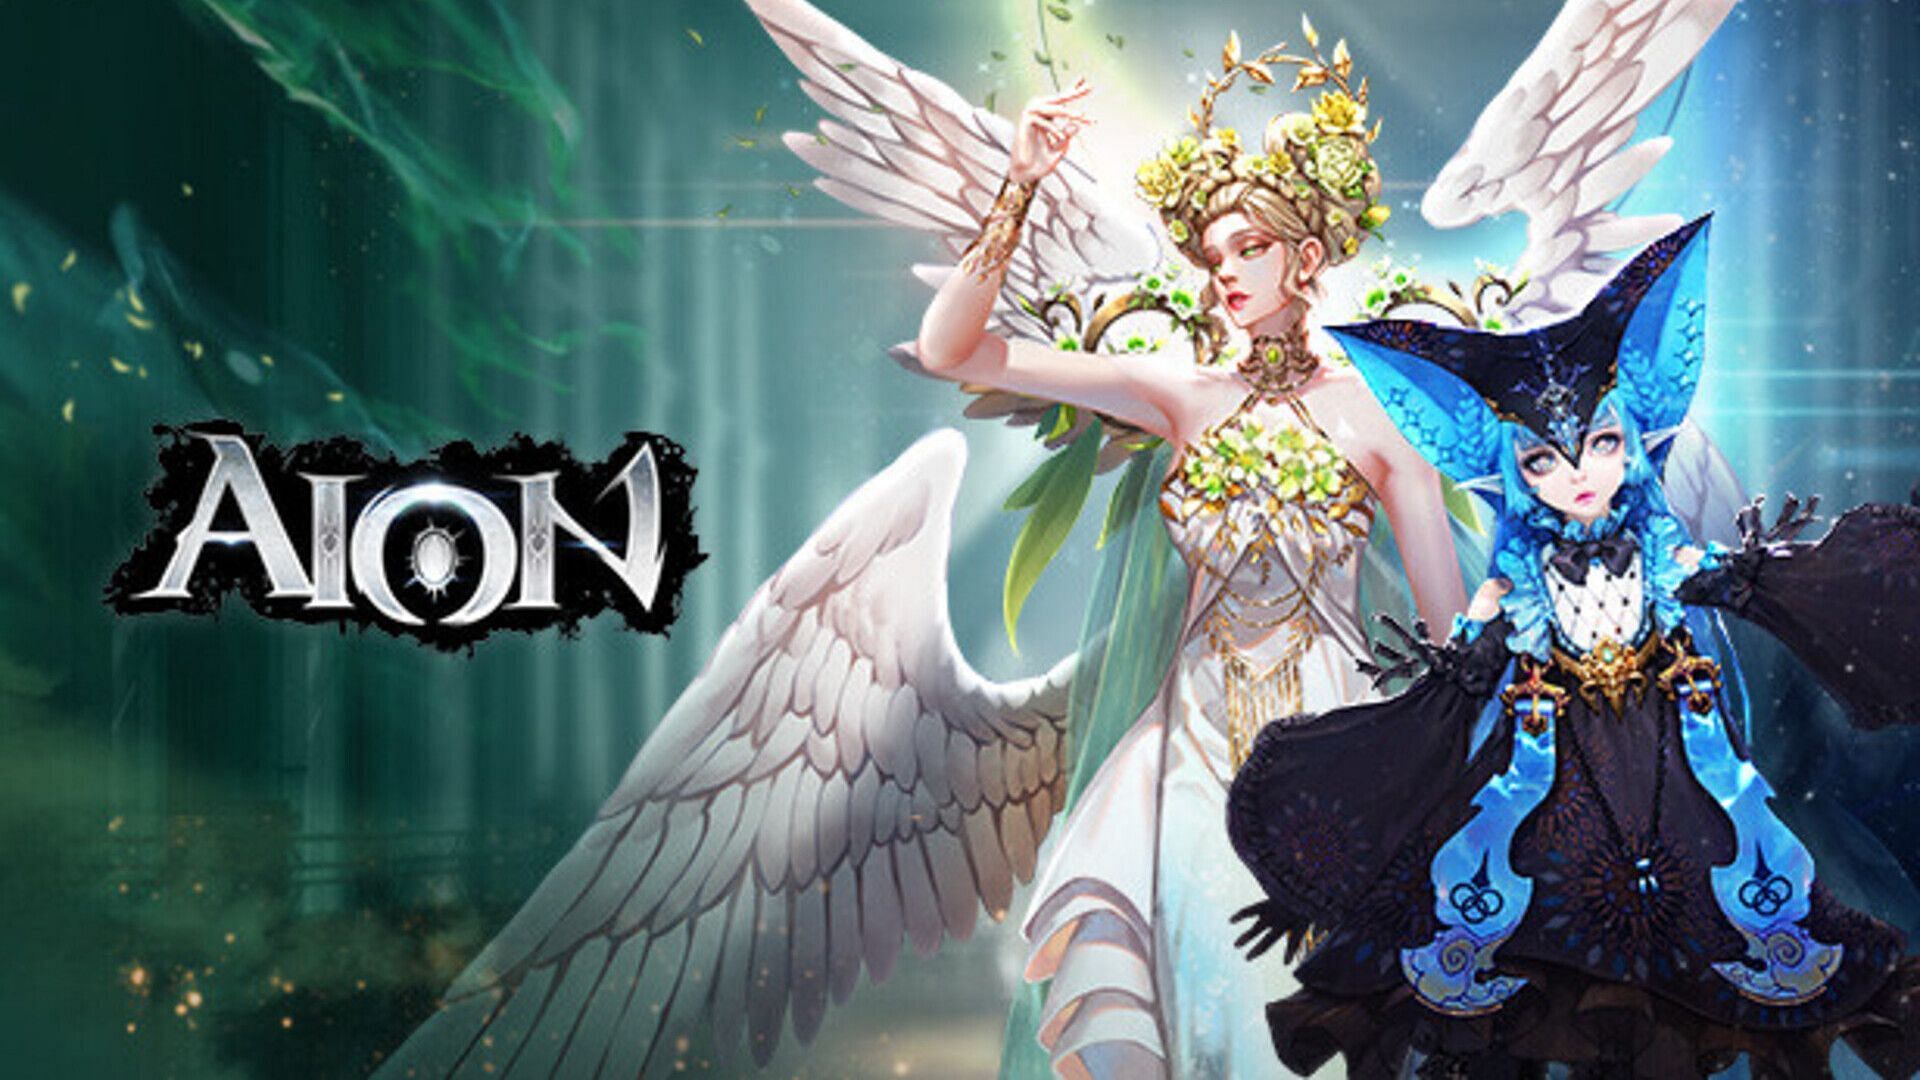 Classic vs the new, which Aion is the best? (Image via Steam)